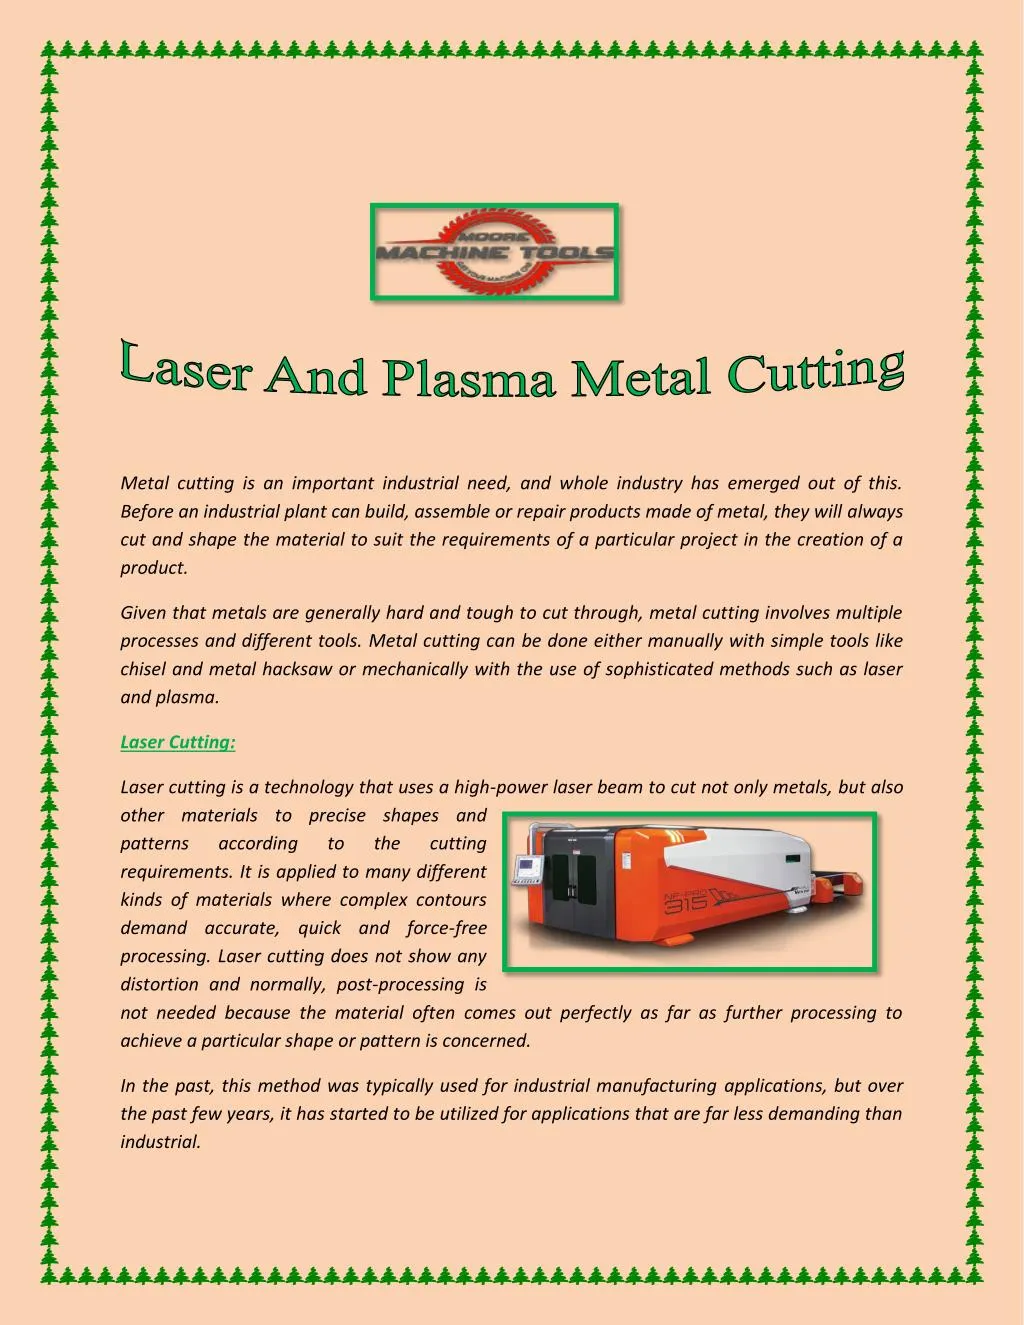 metal cutting is an important industrial need